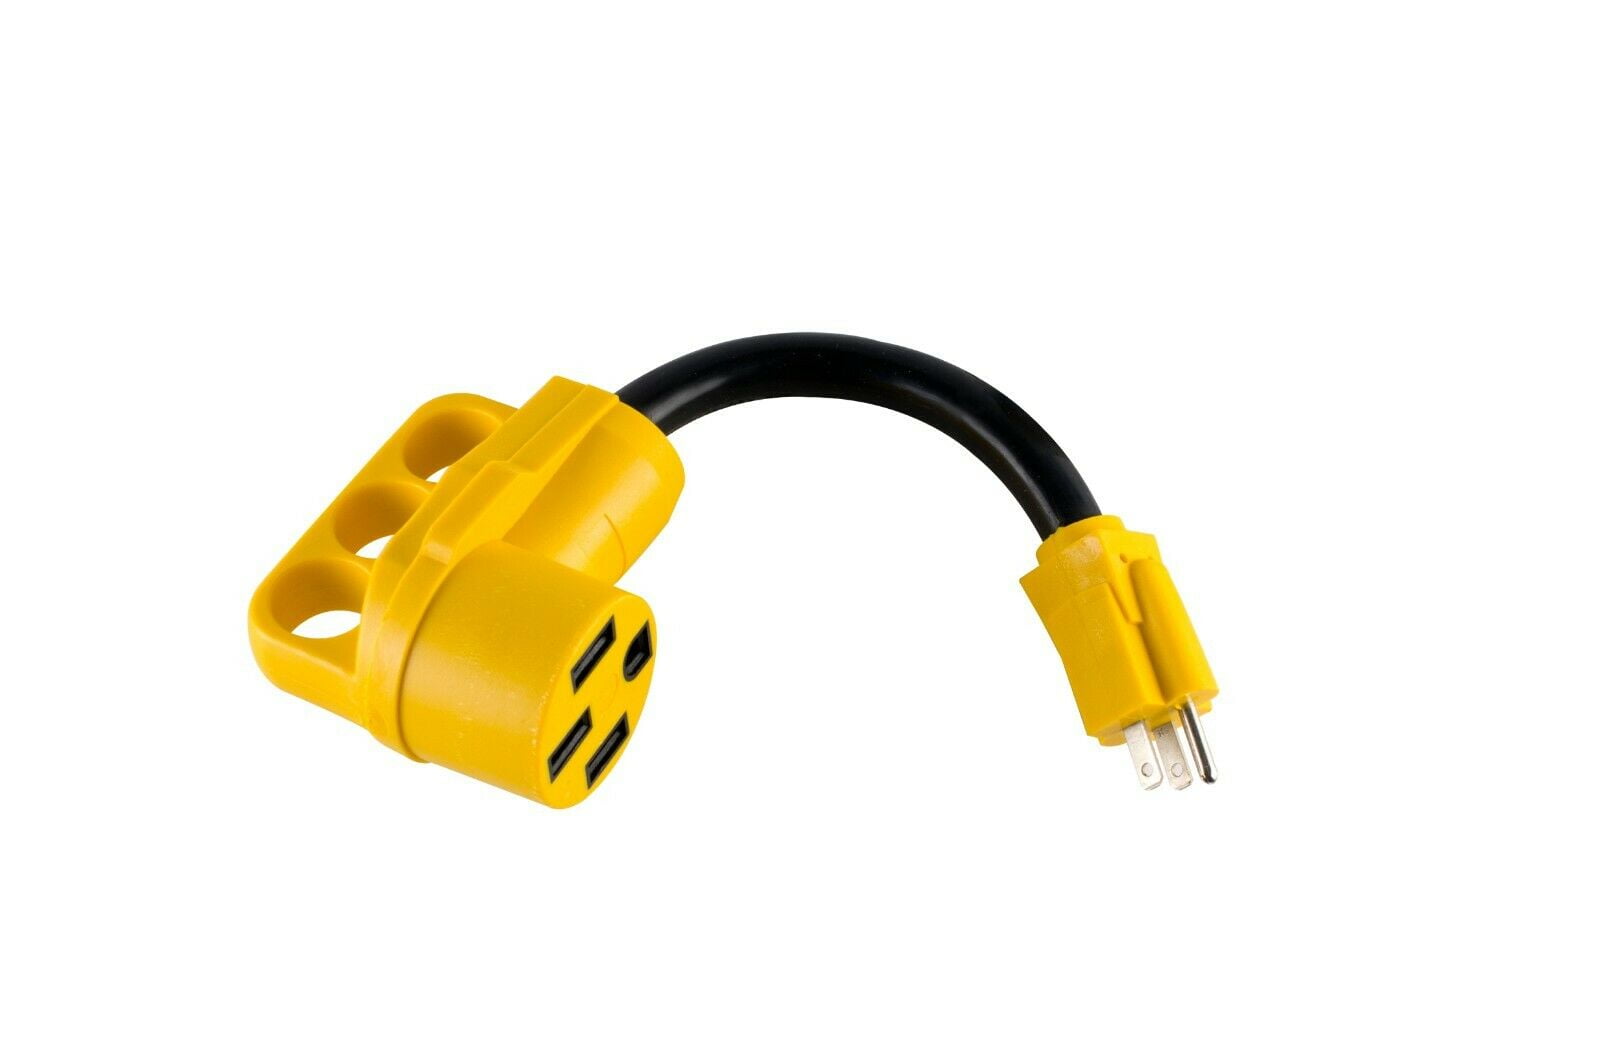 Leisure Cords 50A Male To 50Amp Female Twist Adapter RV Locking Power Cord Male to Female Camper Generator Cable Adapter Electrical Converter Plug 50A Male To 50A Female 